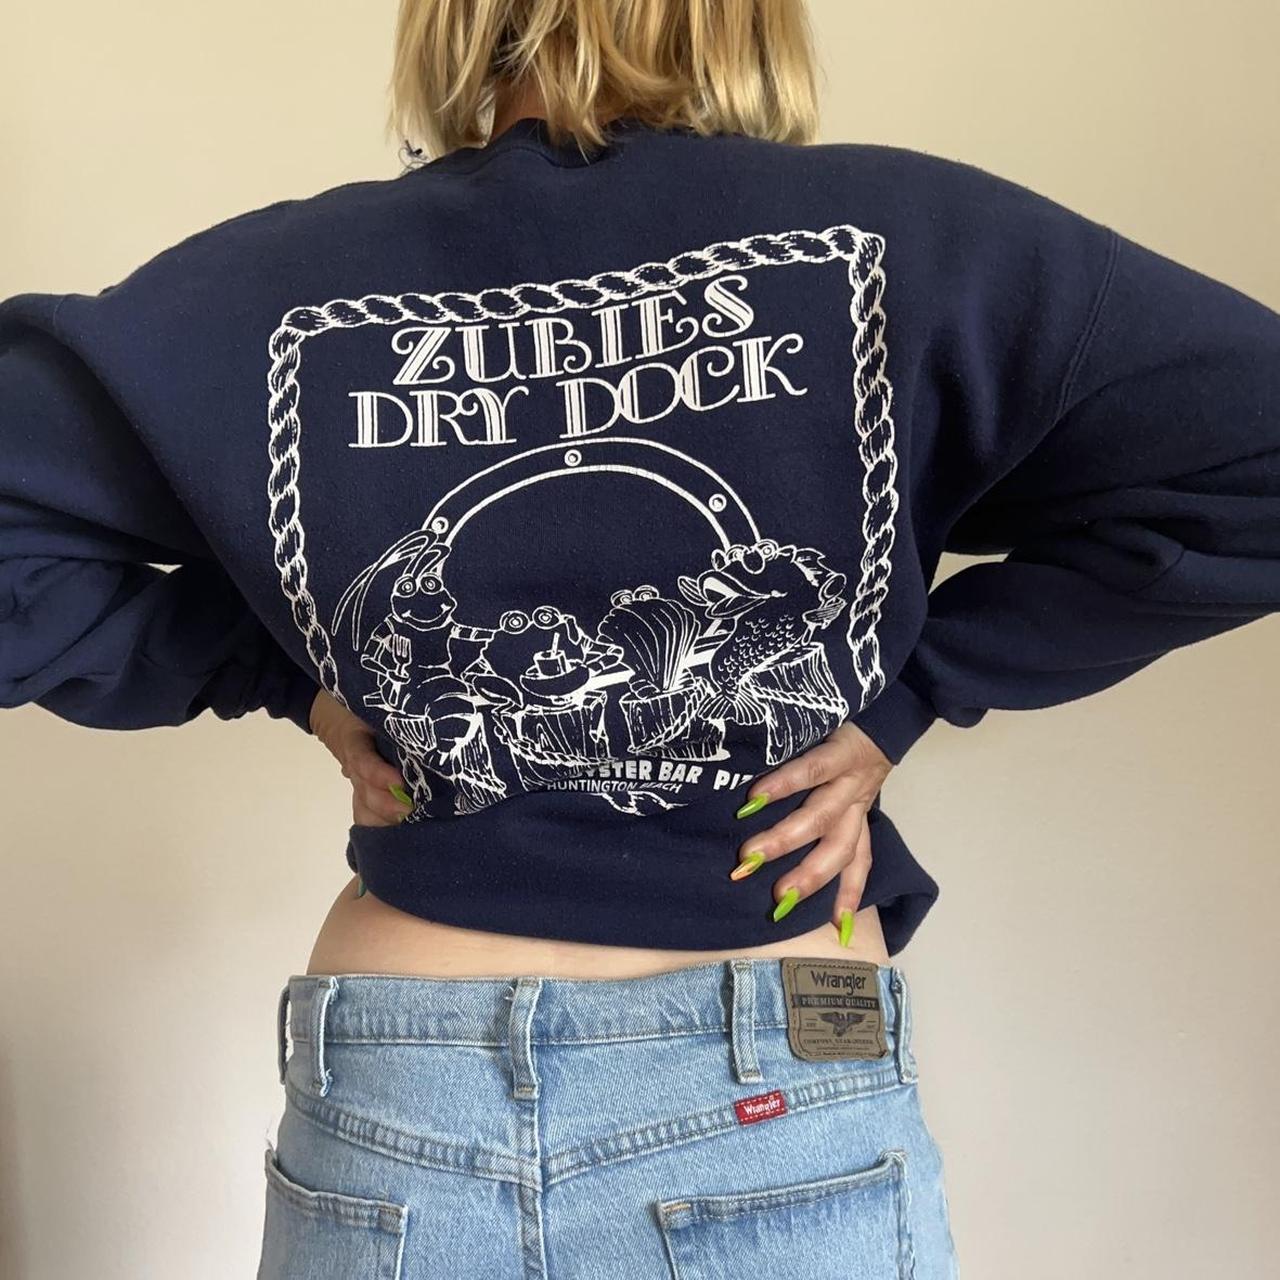 ZUBIES DRY DOCK CREWNECK Super cute graphic of some - Depop